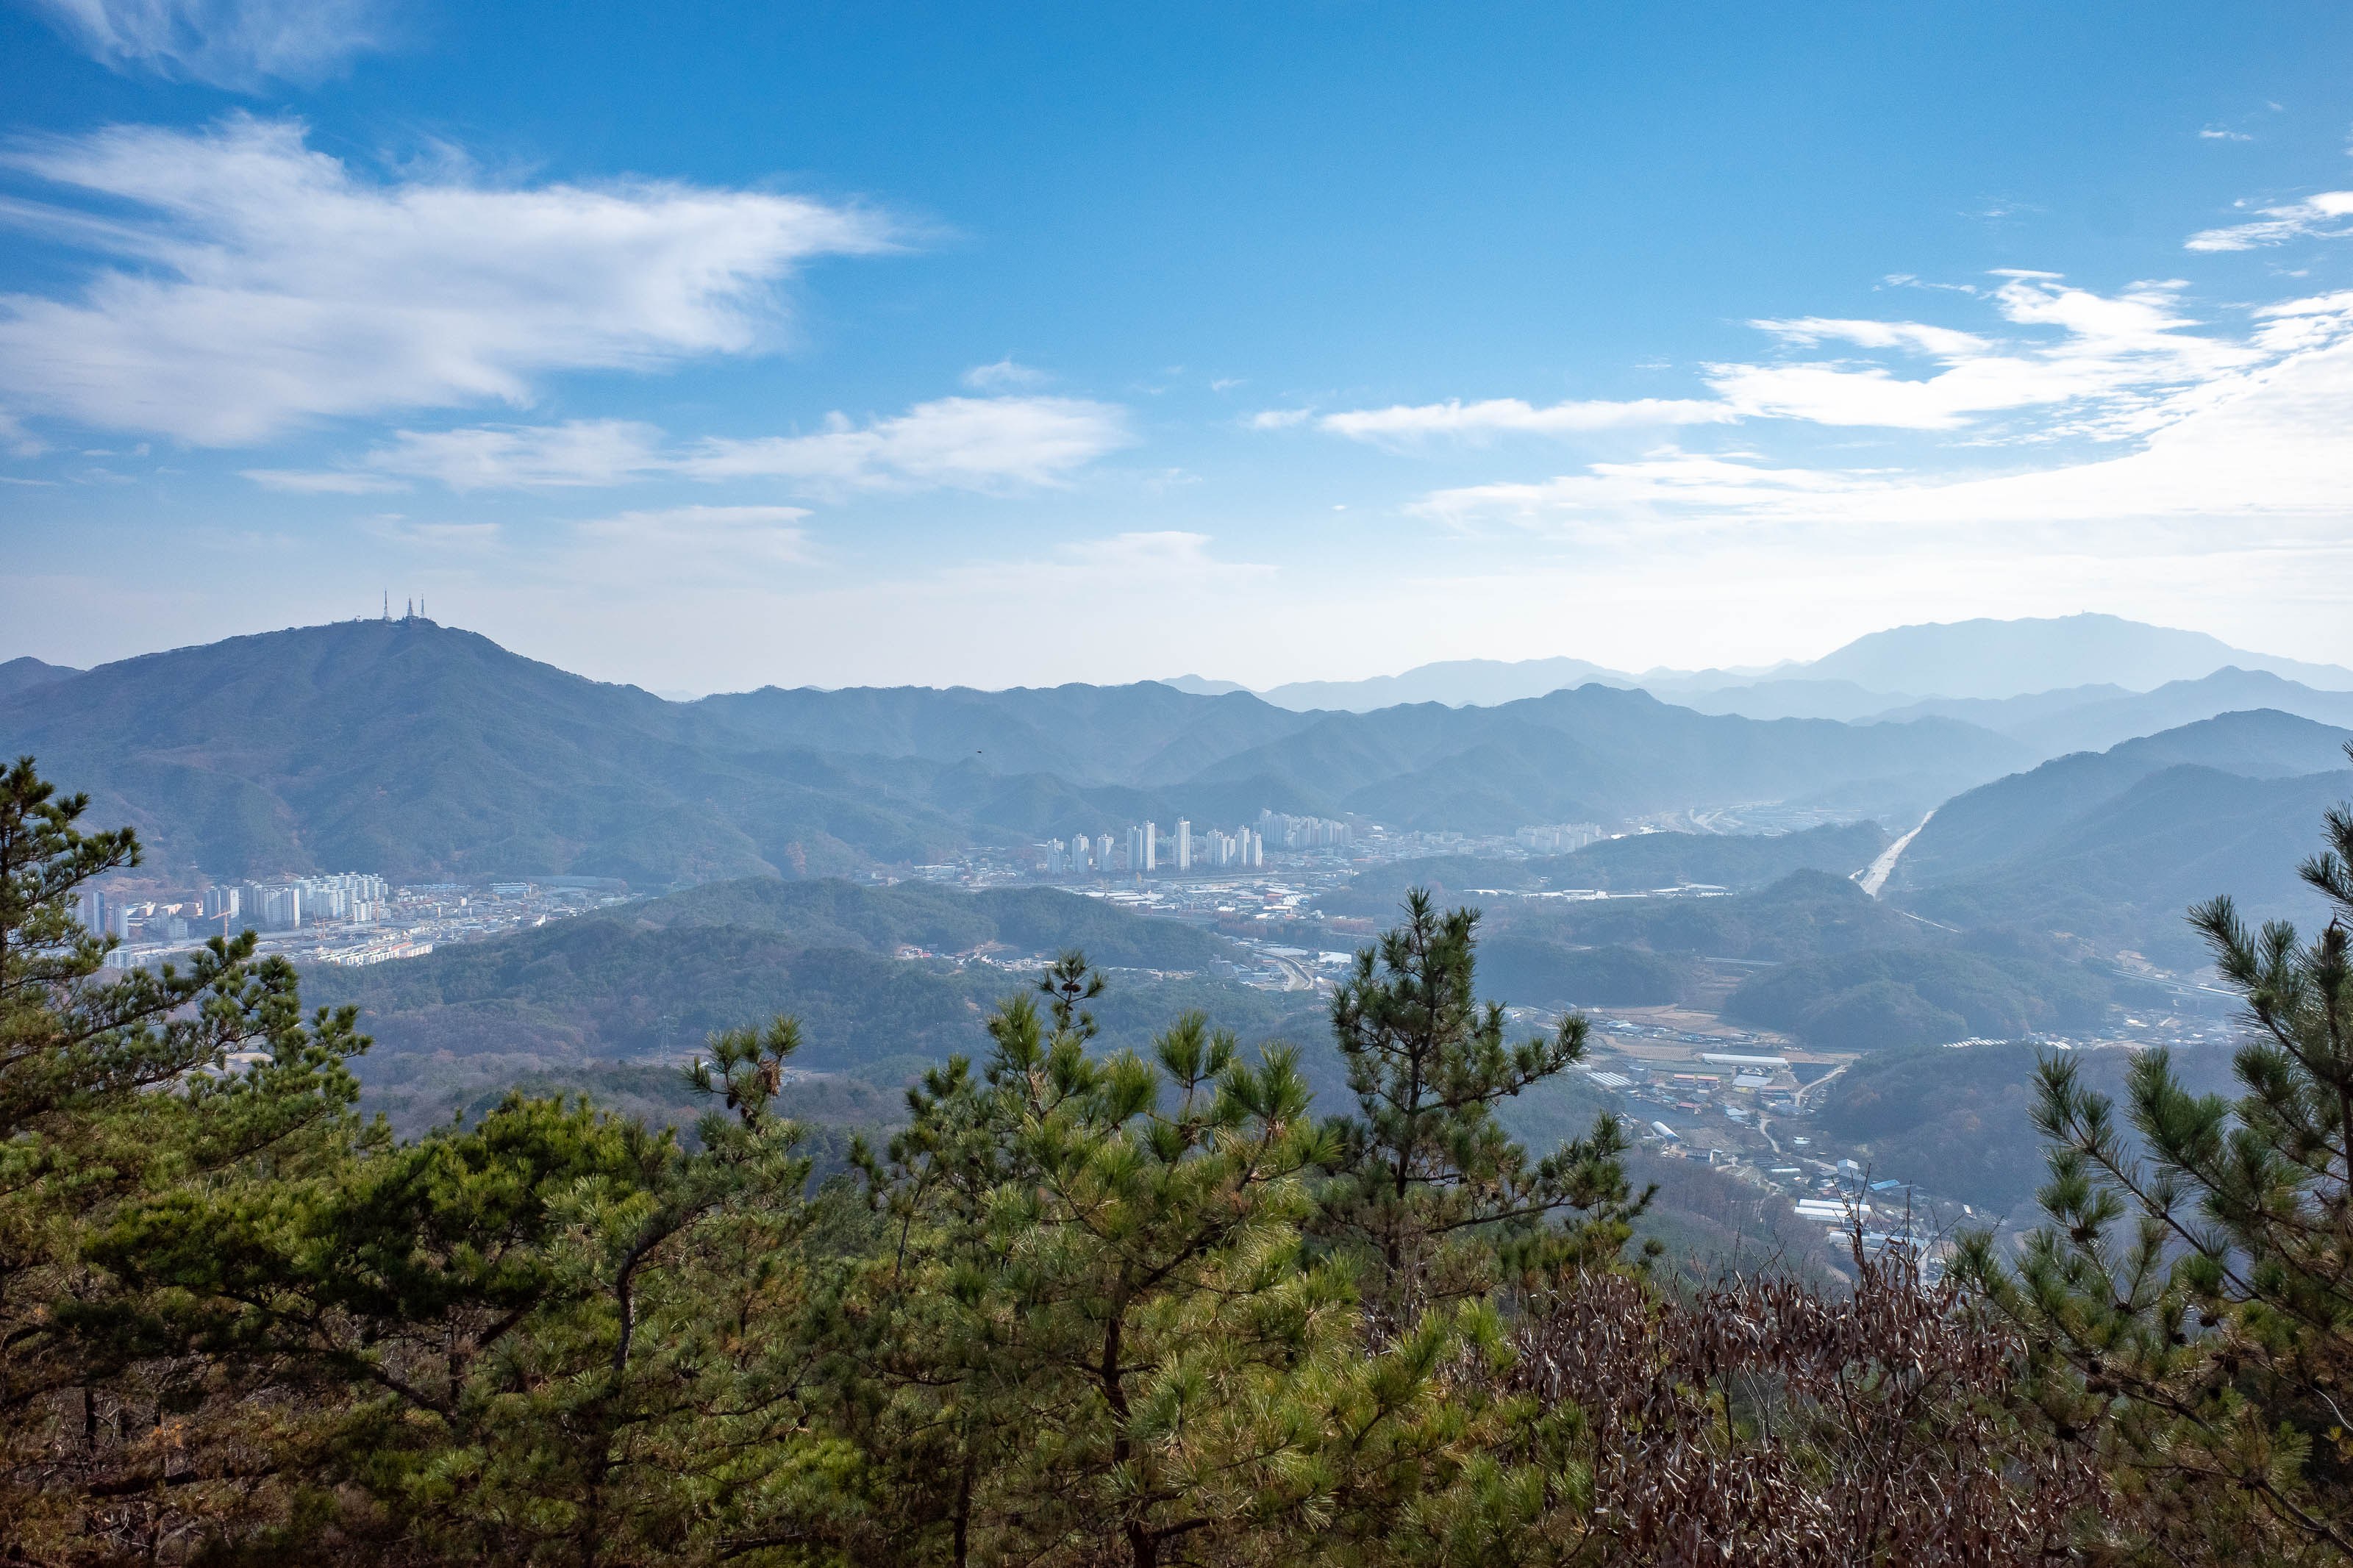 Korean-Hiking-Daejeon-Bomunsan - Nice view further up the valley, all mountains. This is nowhere near the national park which is on completely the opposite side of Daejeon.